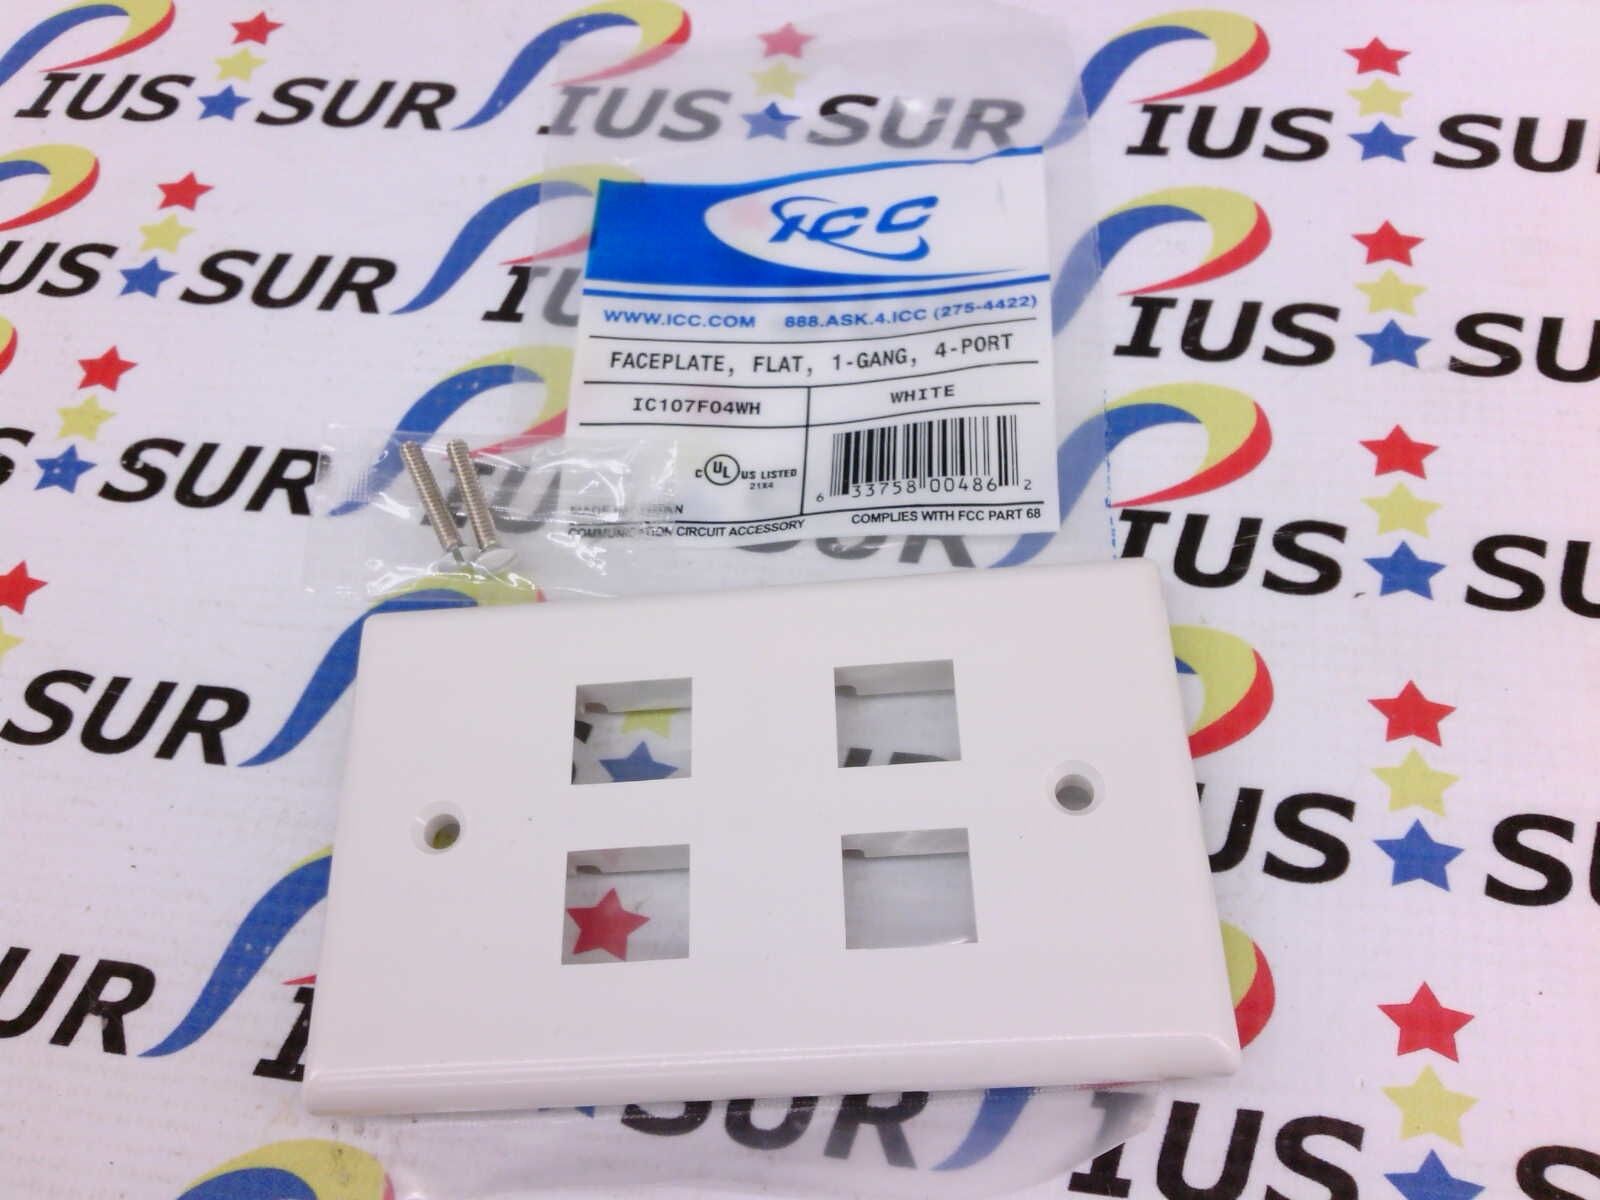 NSOP ICC FacePlate IC107F04WH White Flat 1 Gang 4 Port Wall Plate